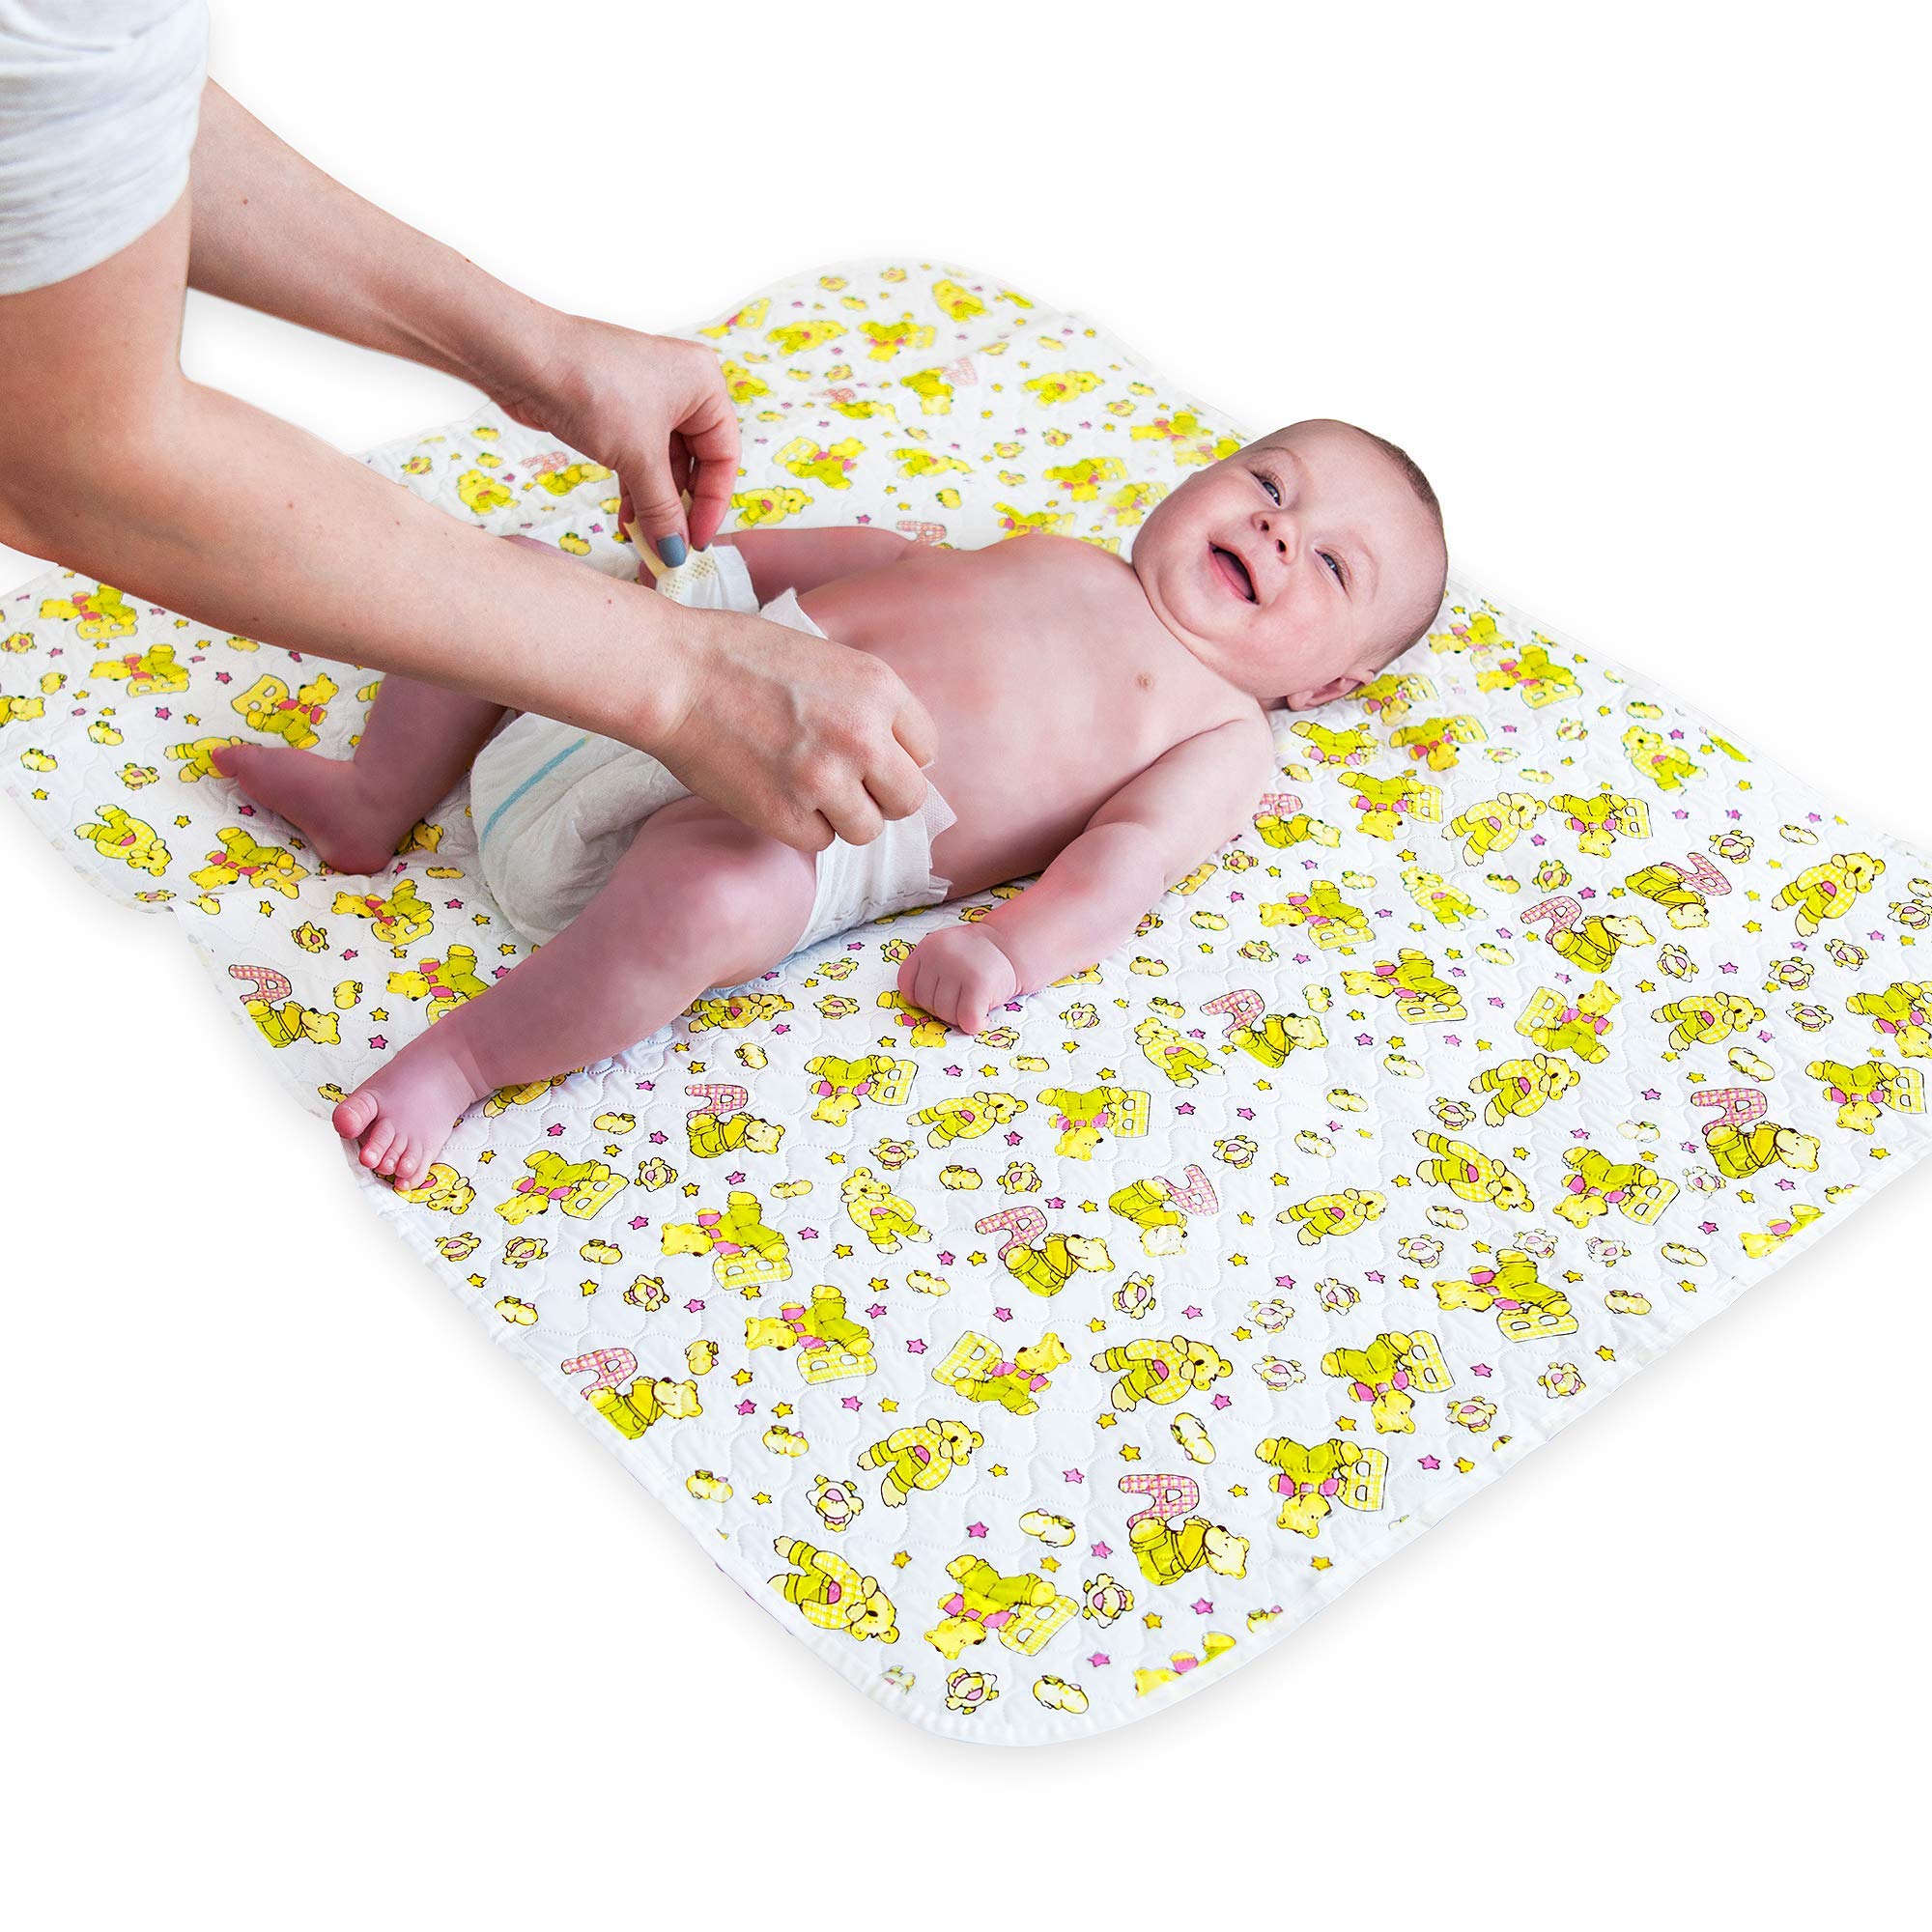 Buy Changing Mat - Biggest Waterproof & Reusable Portable Changing Pad  25.5x31.5 for Change Diaper in Any Places - Unisex Design for Girls &  Boys - Reinforced Double Seams - Free Storage